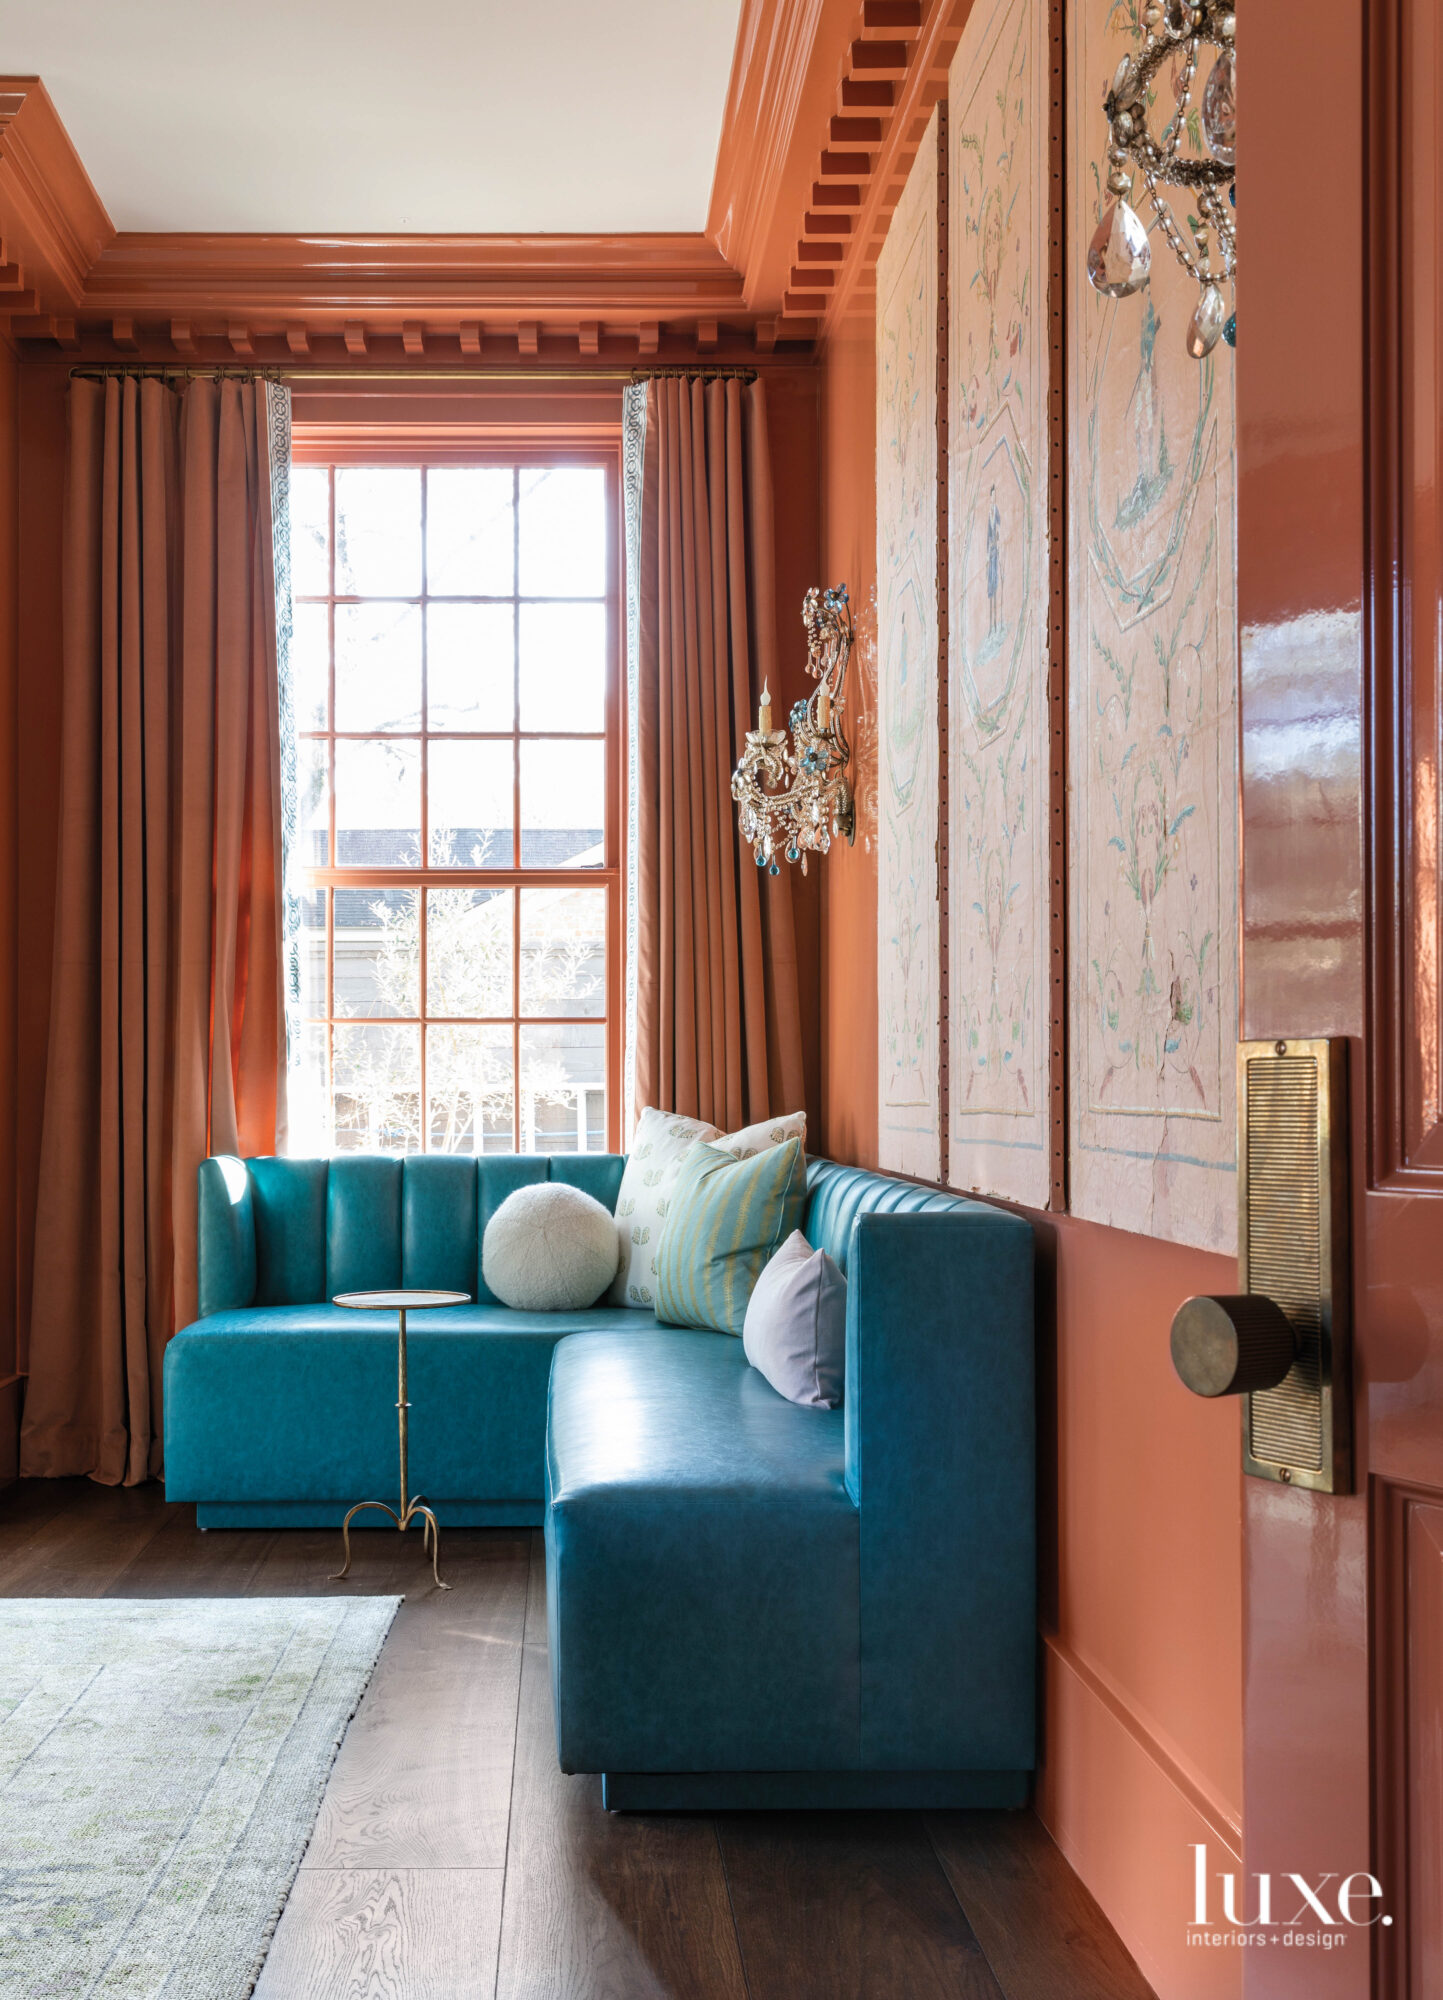 Living room seating area with teal banquette